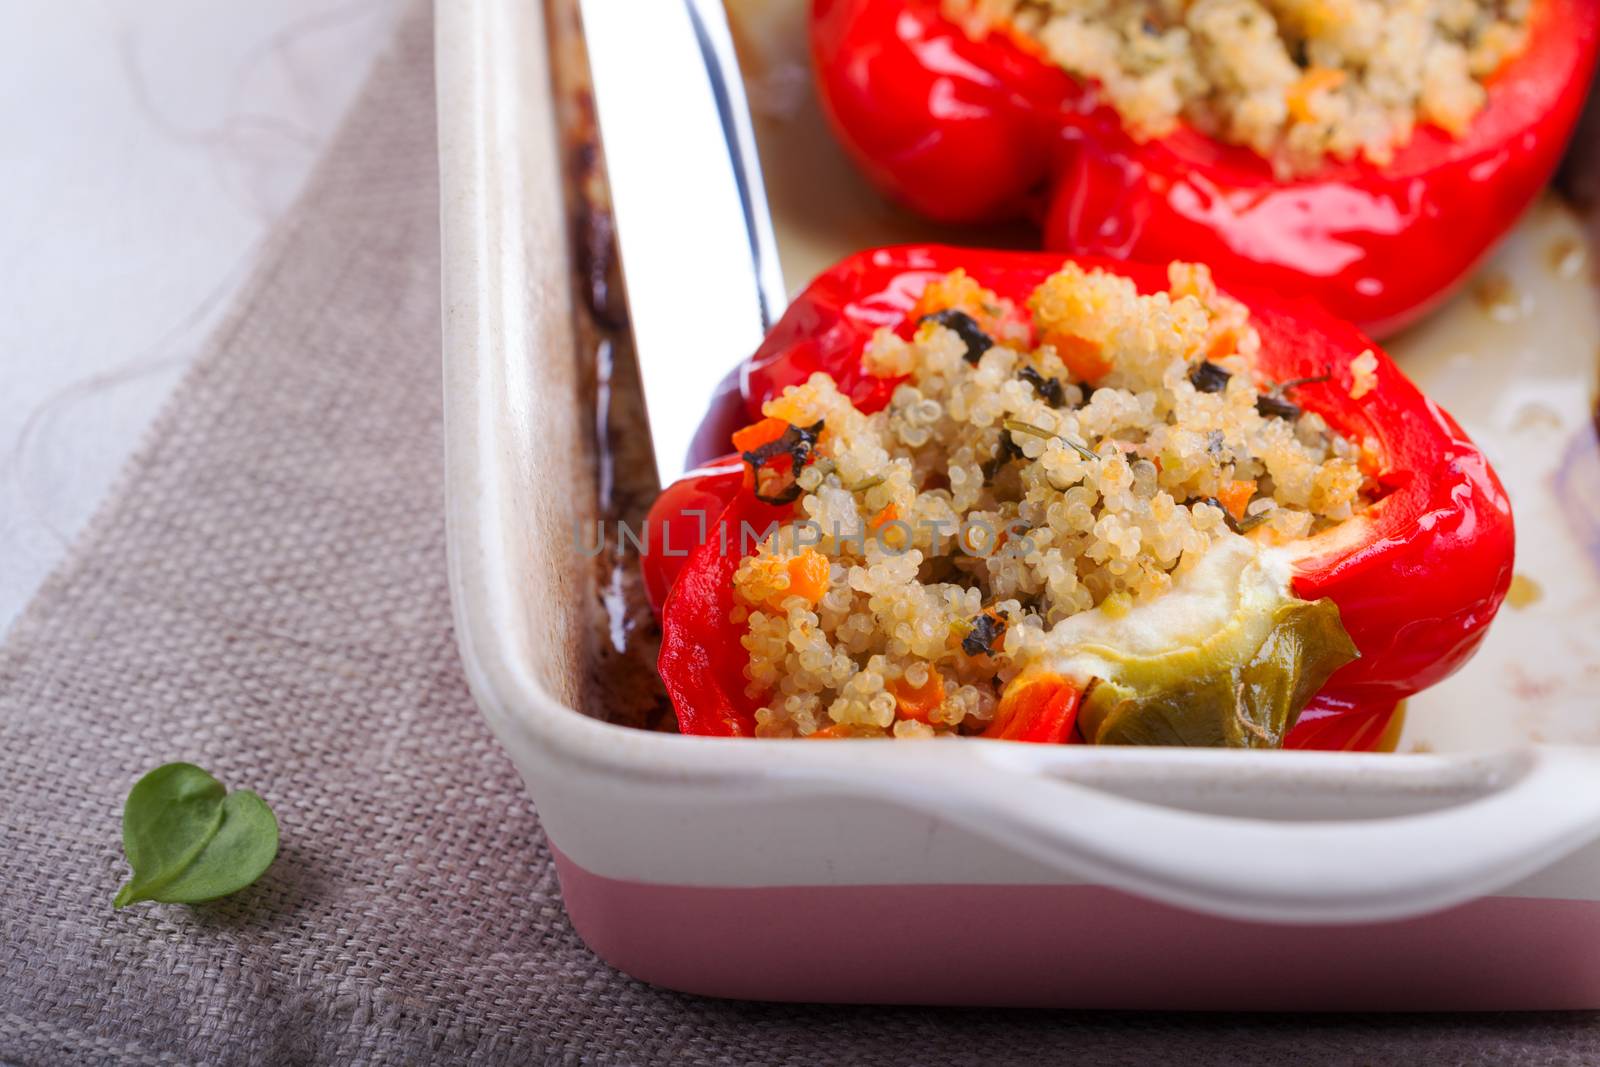 Stuffed Red Peppers by supercat67